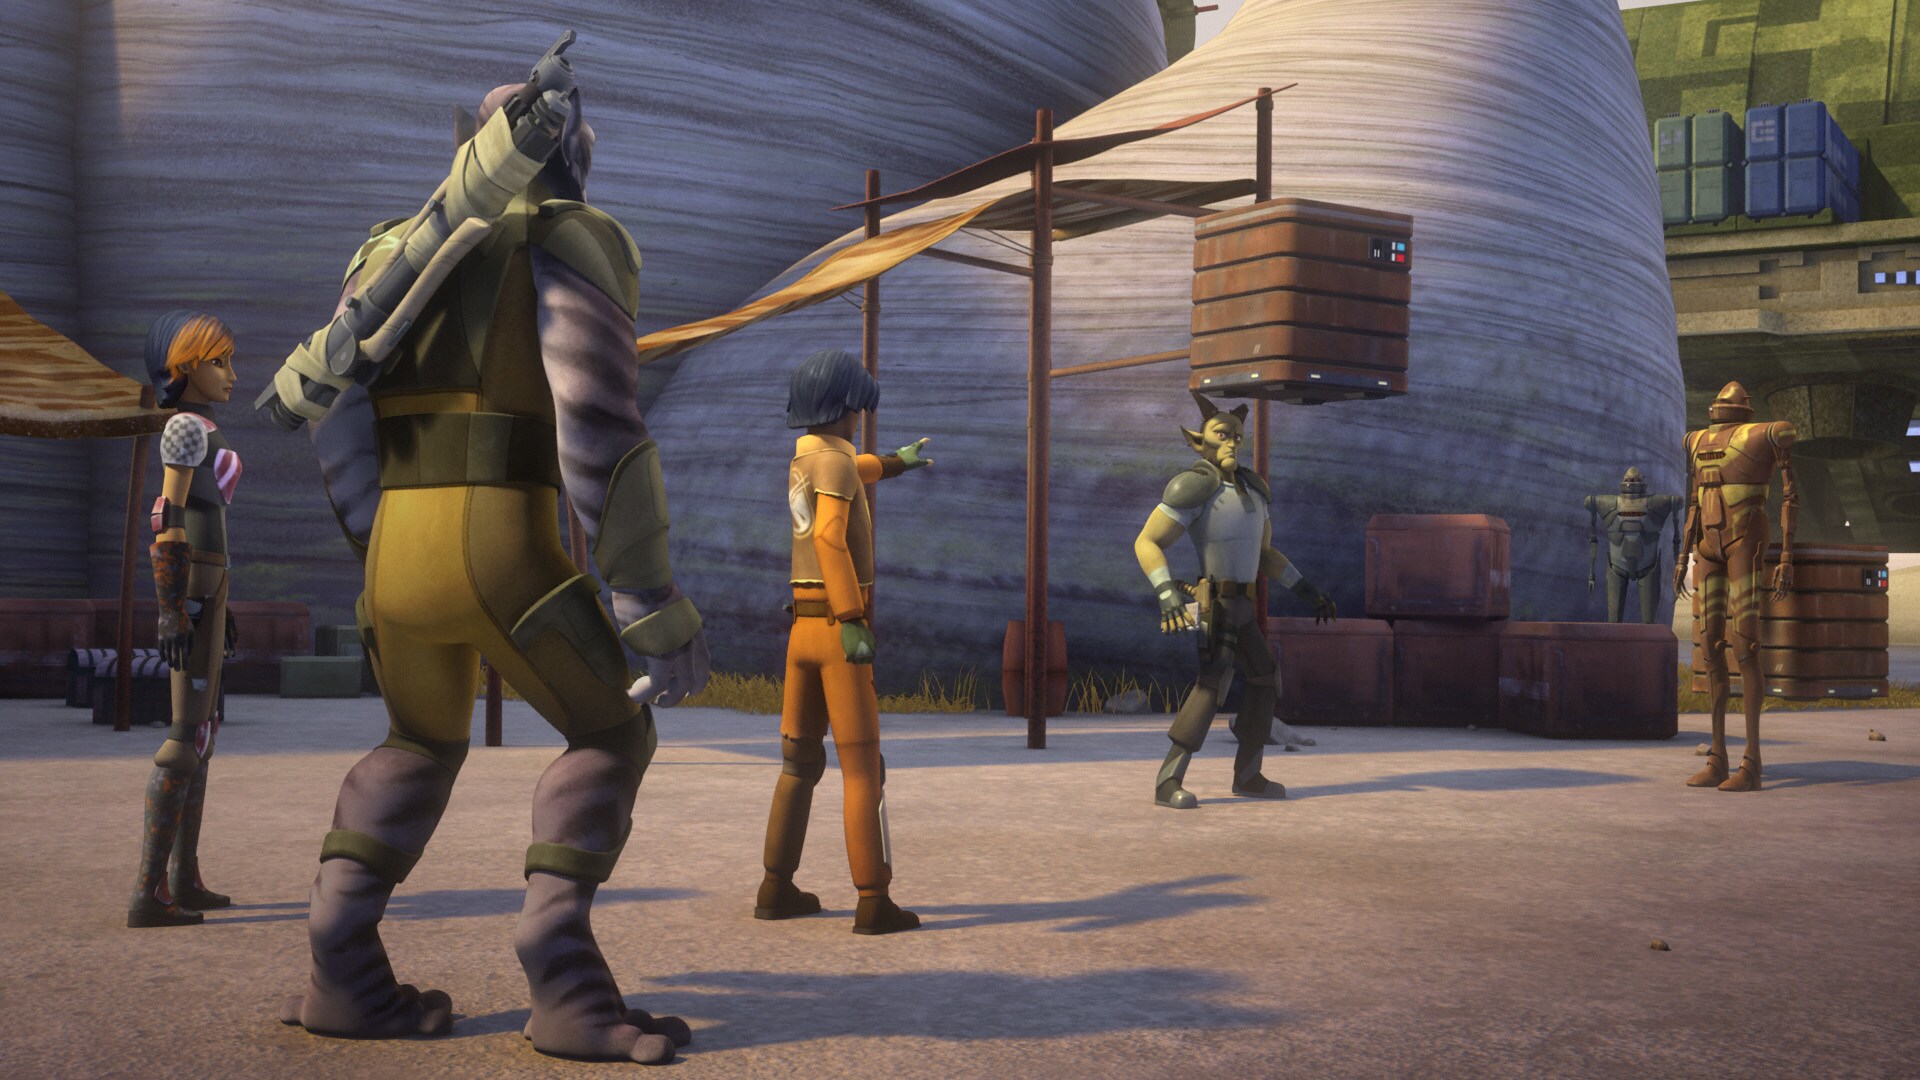 To prove himself, Ezra levitates a heavy crate over Vizago's head. The smuggler leaps to safety, ...